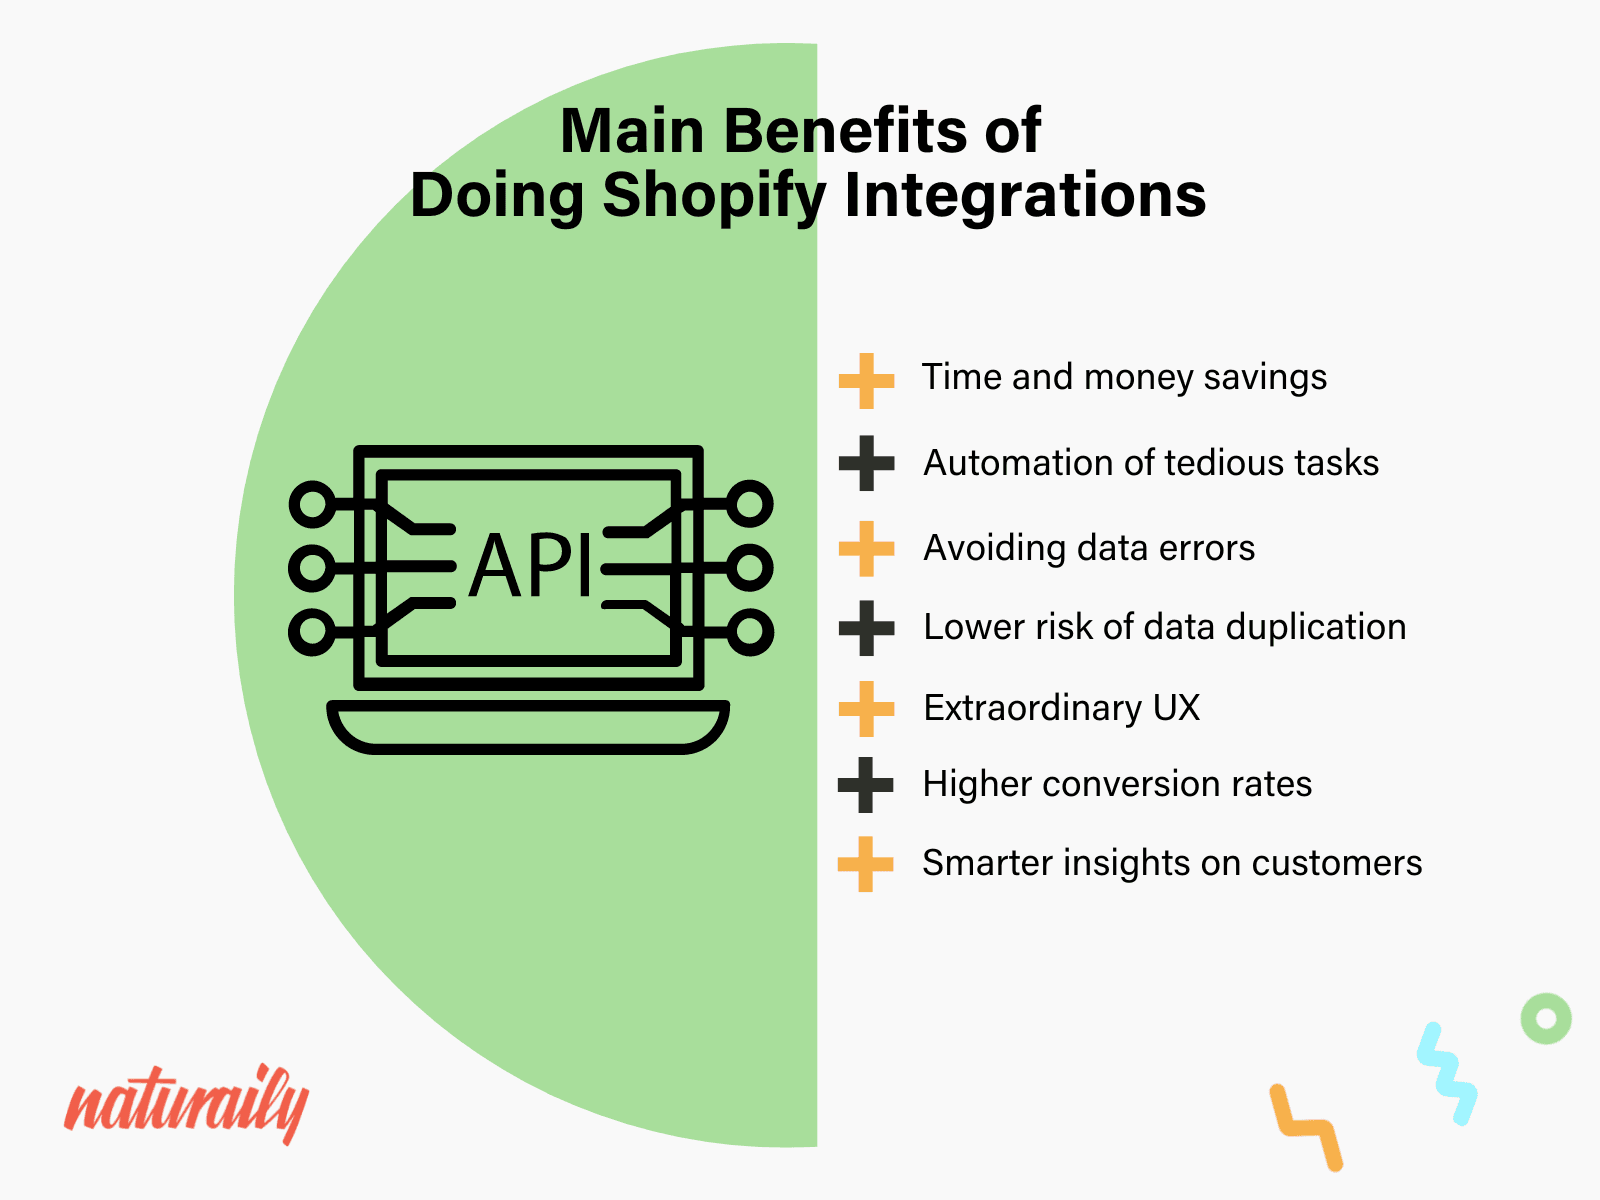 Main Benefits of Doing Shopify Integrations